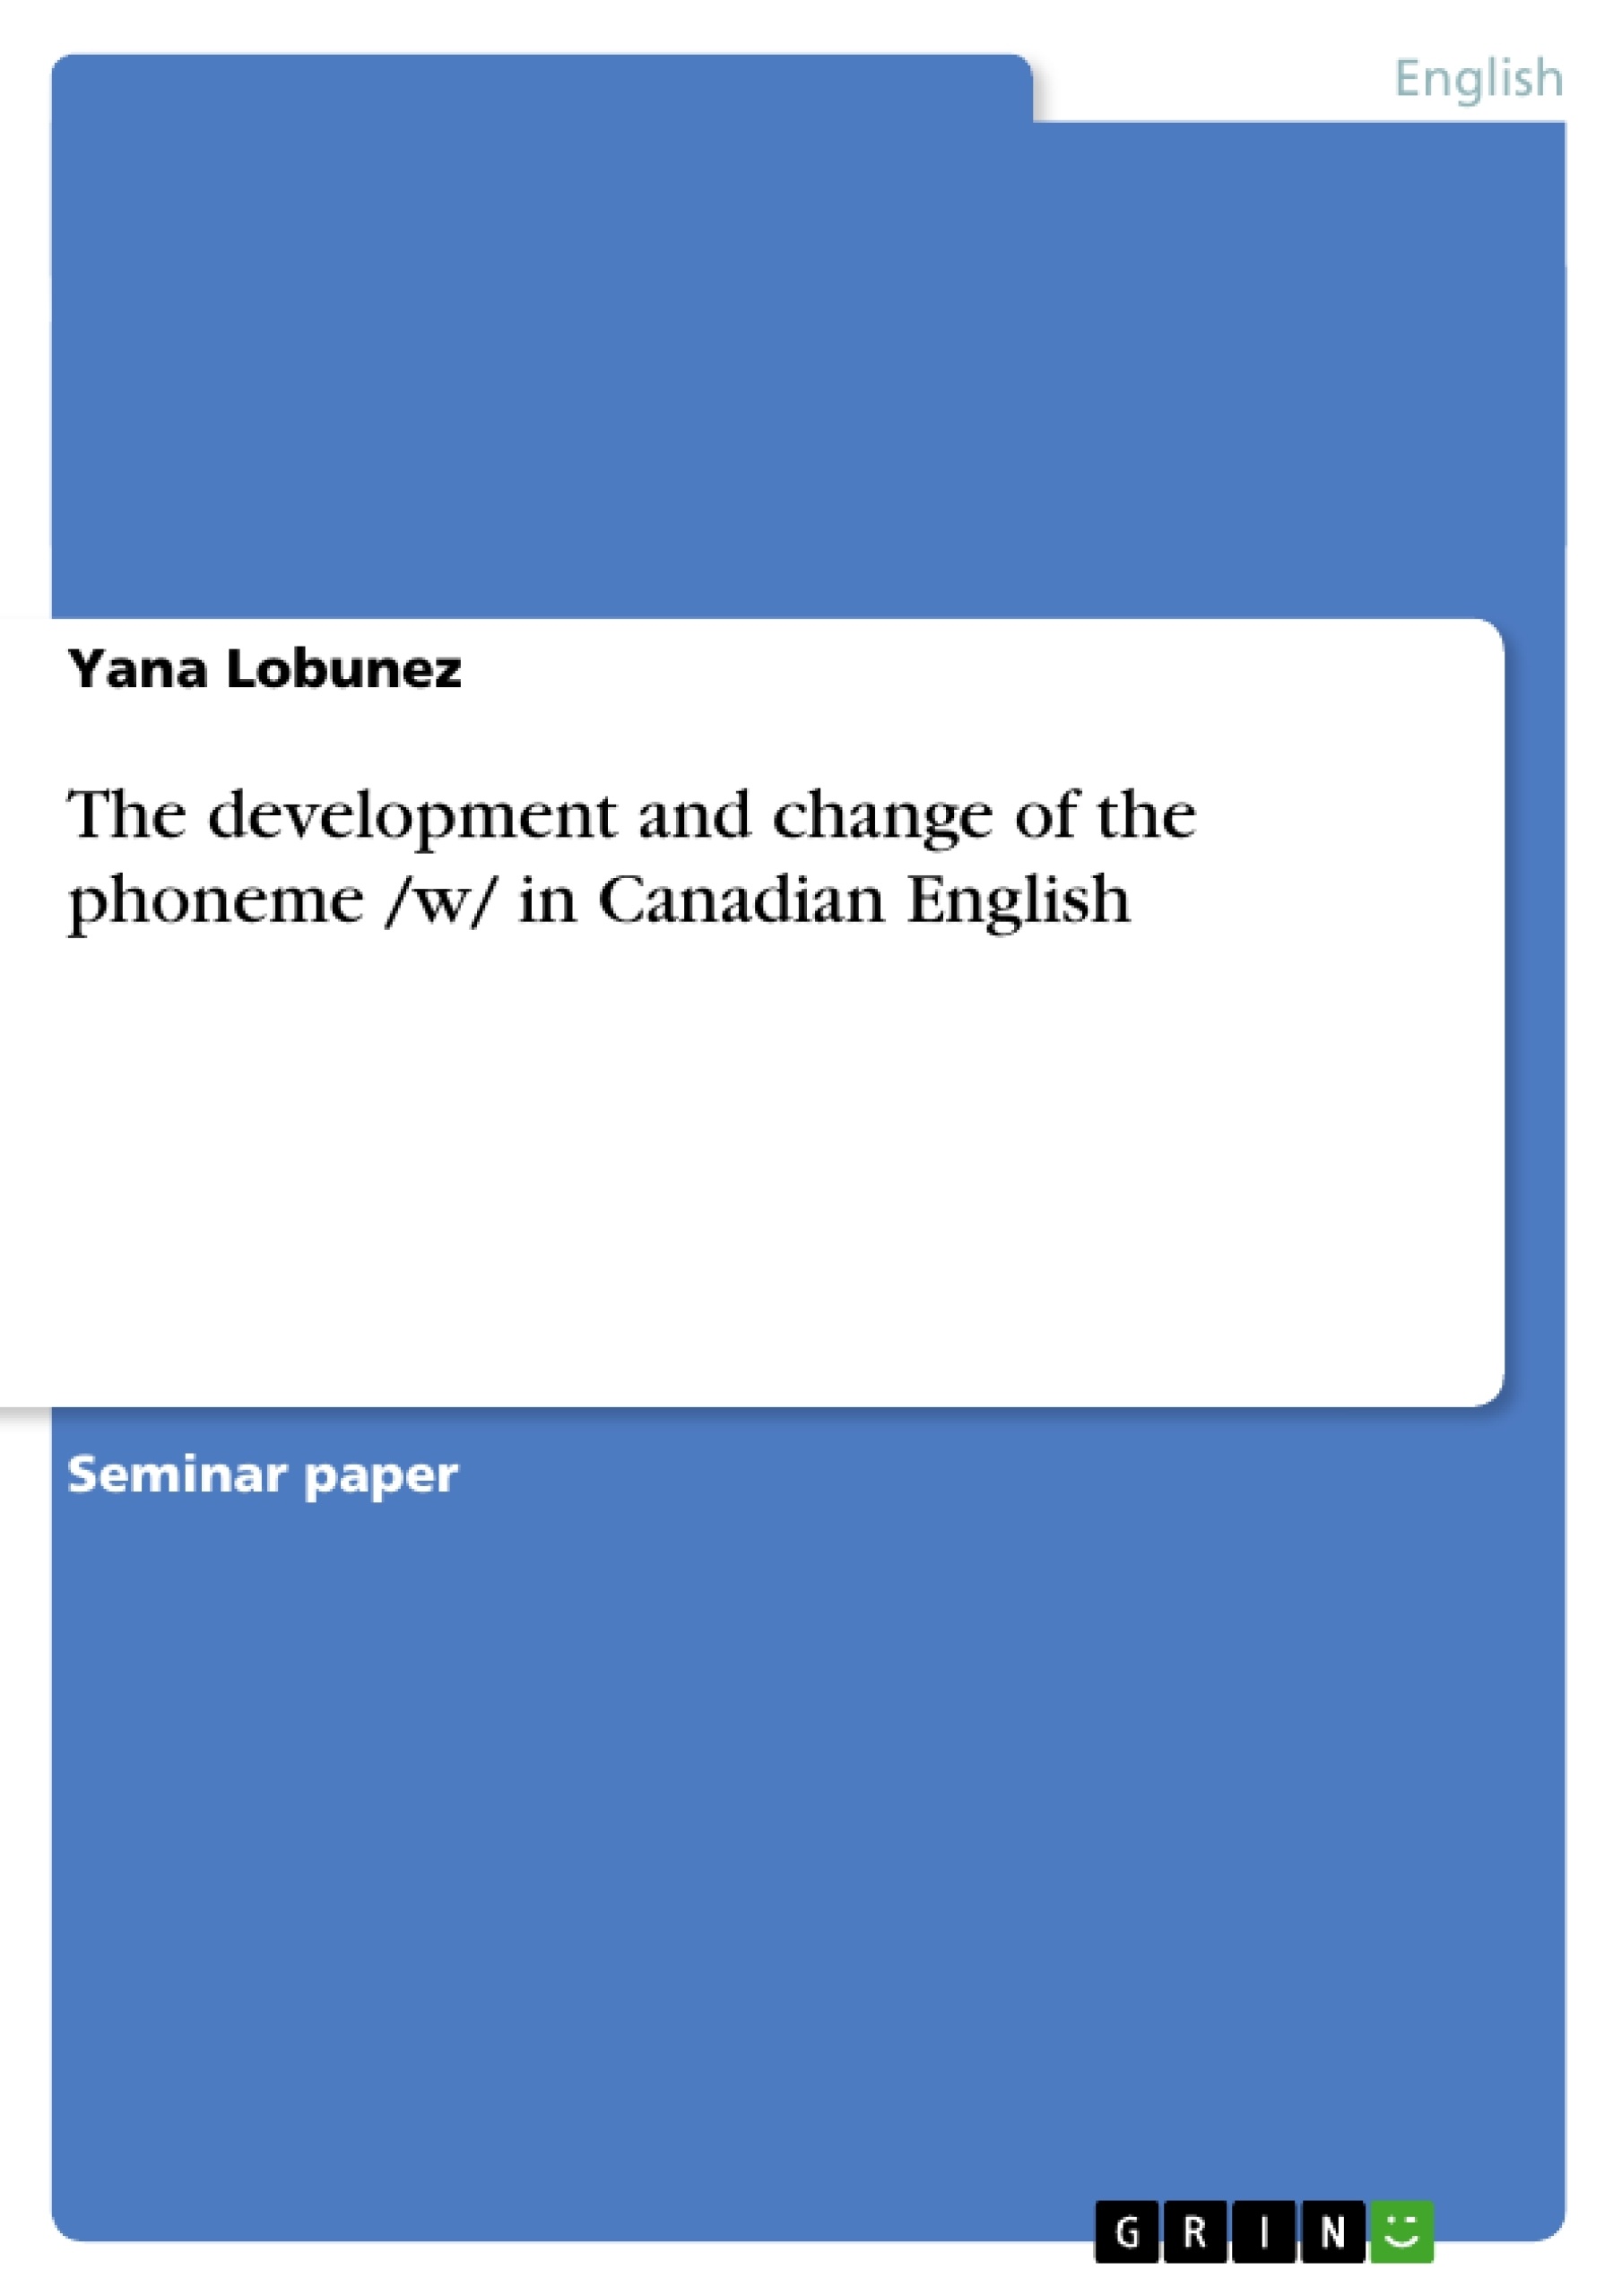 Título: The development and change of the phoneme /w/ in Canadian English 